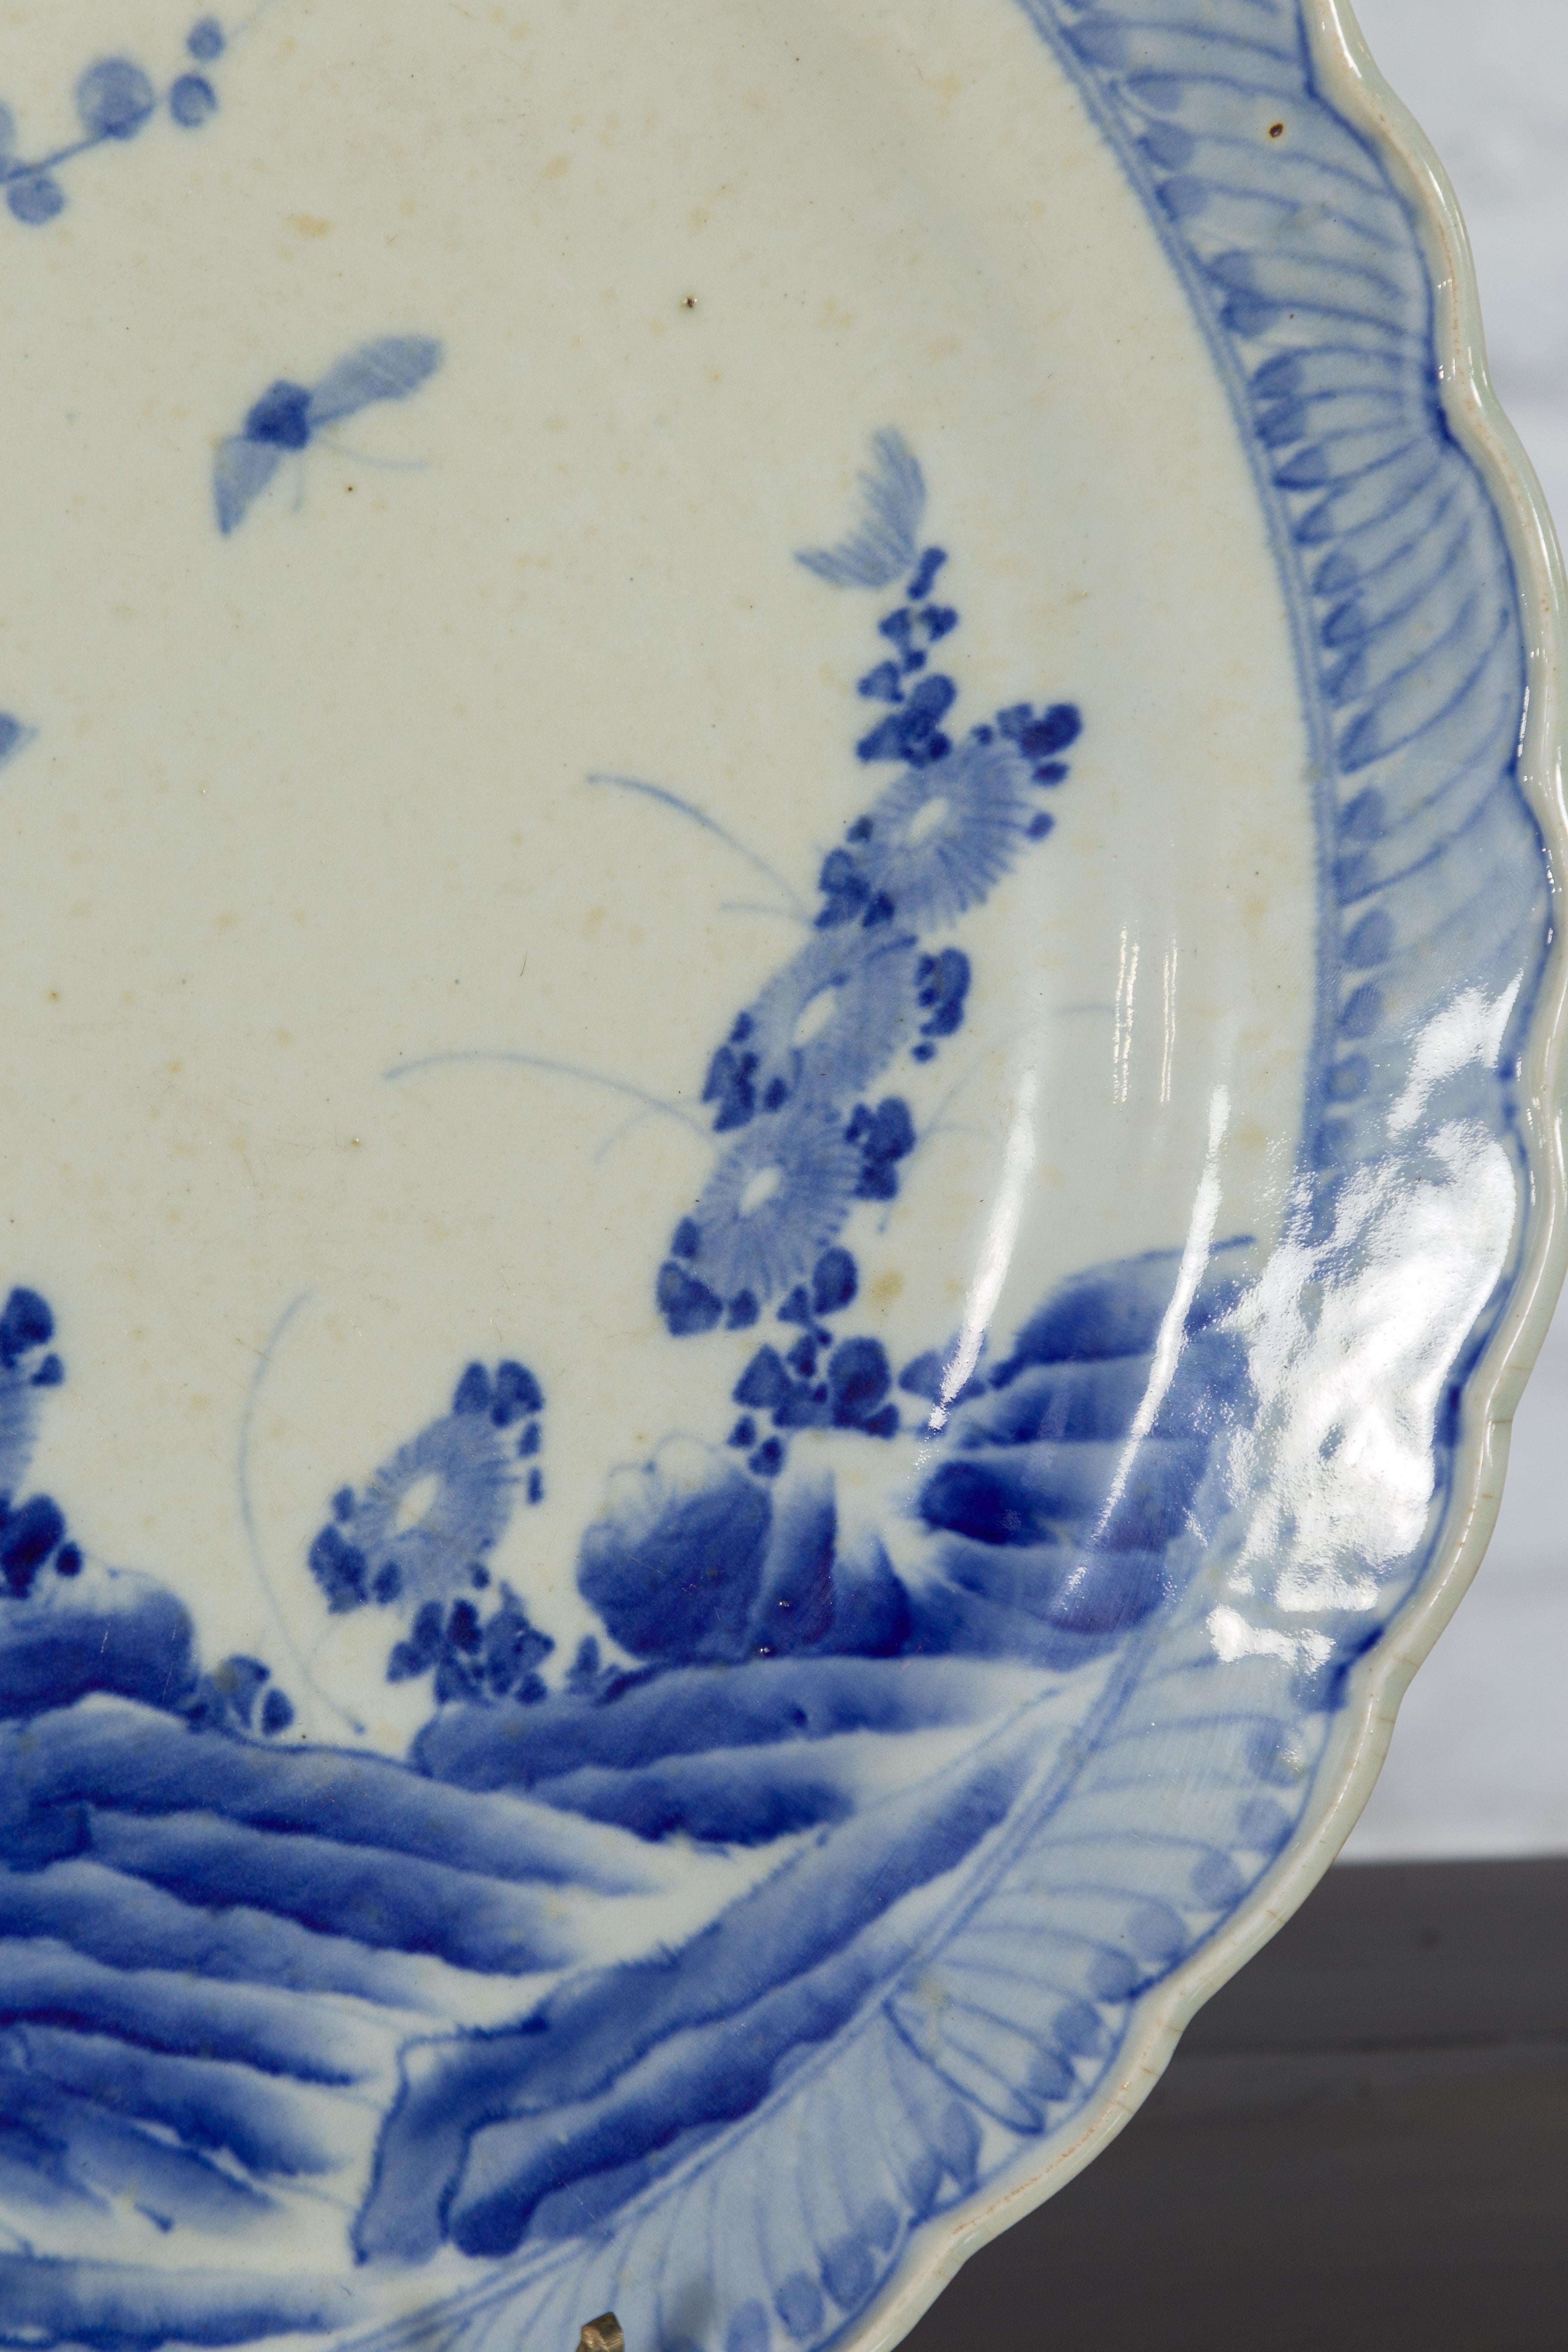 Japanese Blue and White Hand-Painted Porcelain Charger Plate with Foliage Décor For Sale 4